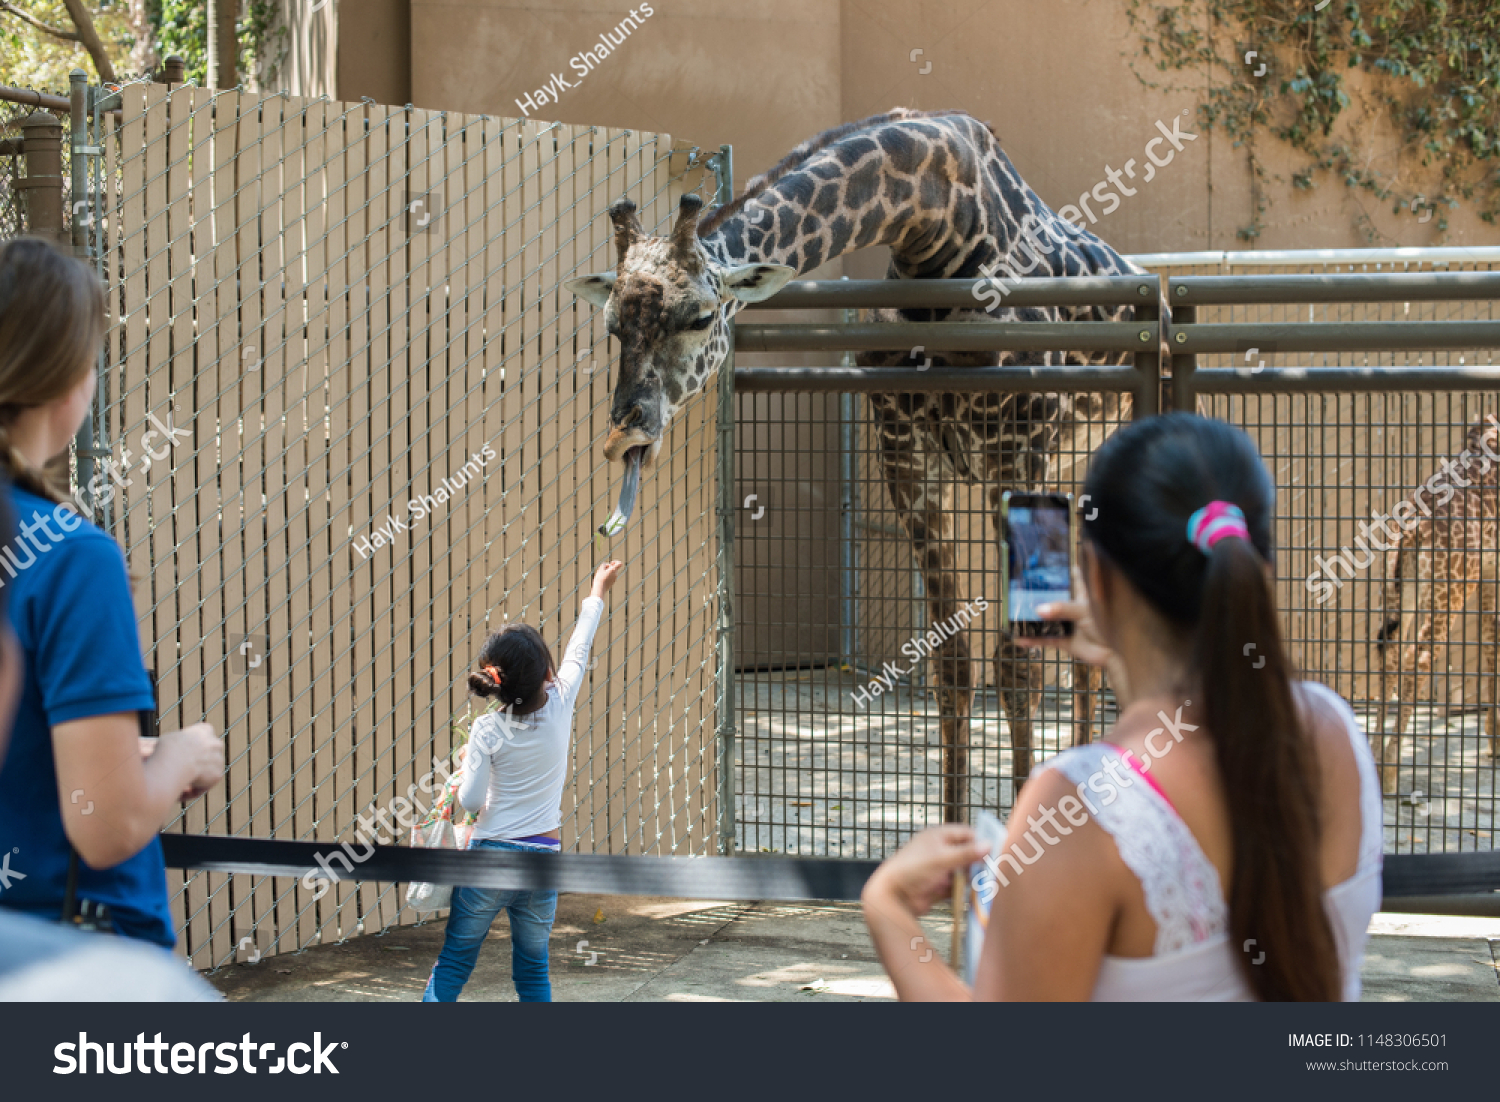 Los Angeles, California, USA -August 01, 2018: Unidentified visitors feeding giraffe at the Los Angeles Zoo and Botanical Gardens which is a 133-acre zoo founded in 1966  in Los Angeles, California. #1148306501